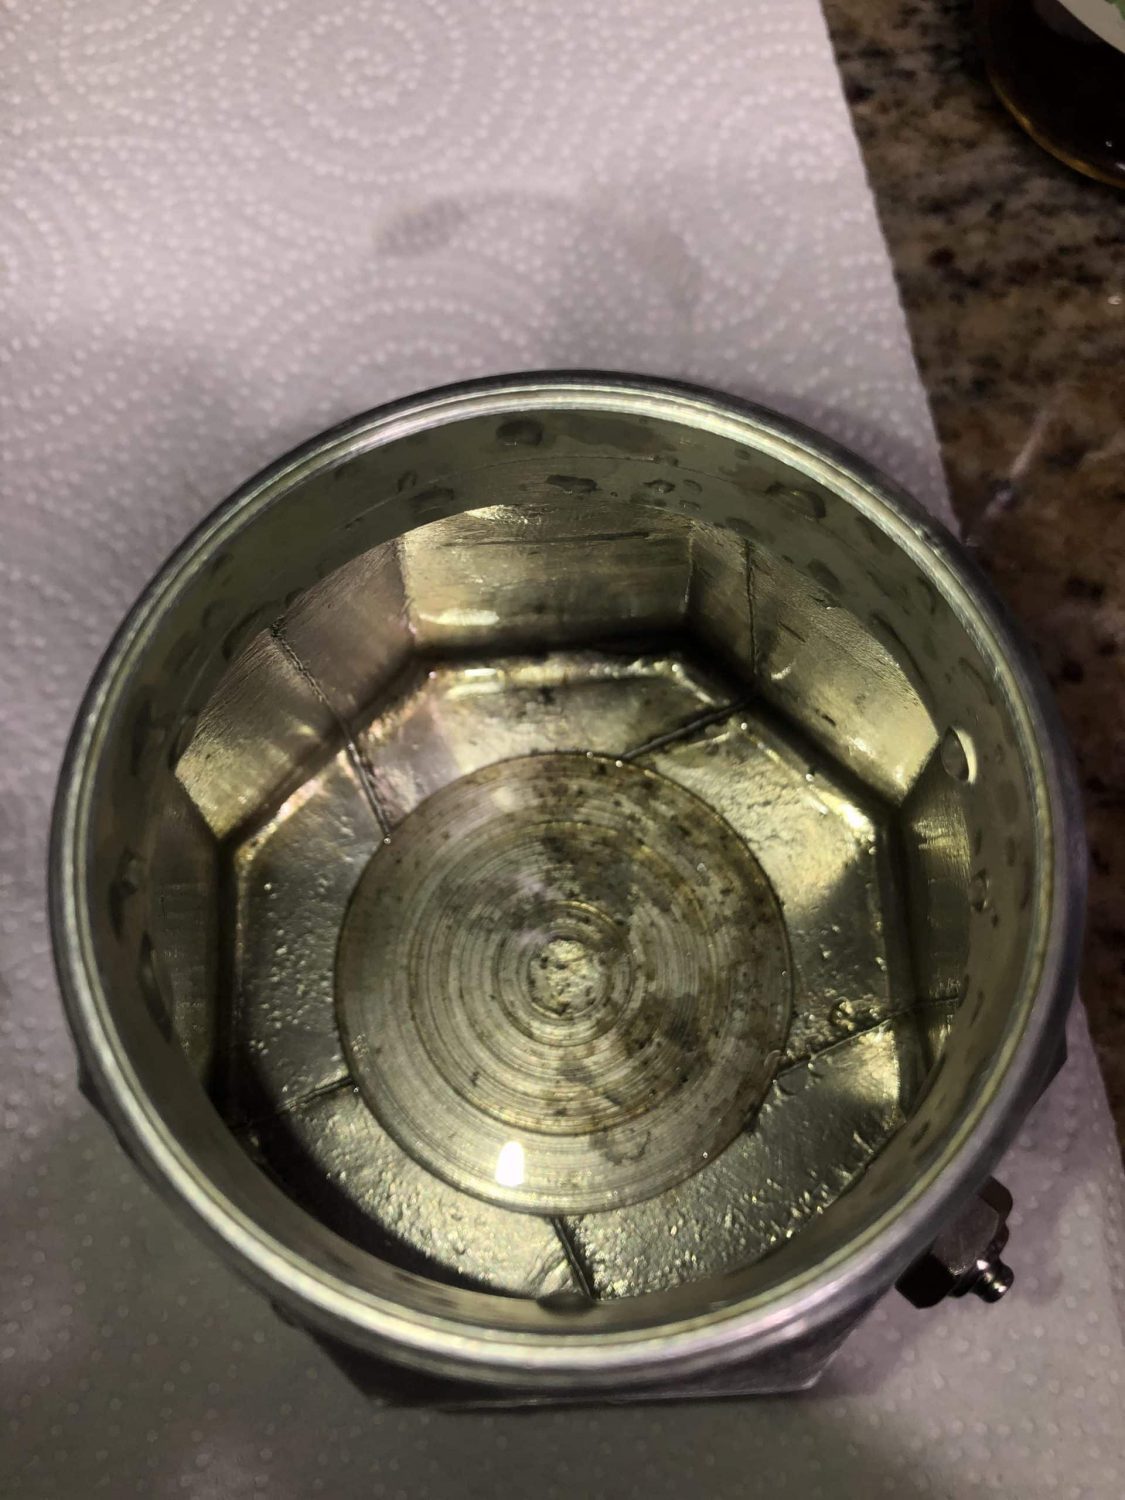 What Is The White Stuff On The Bottom Of My Bialetti?